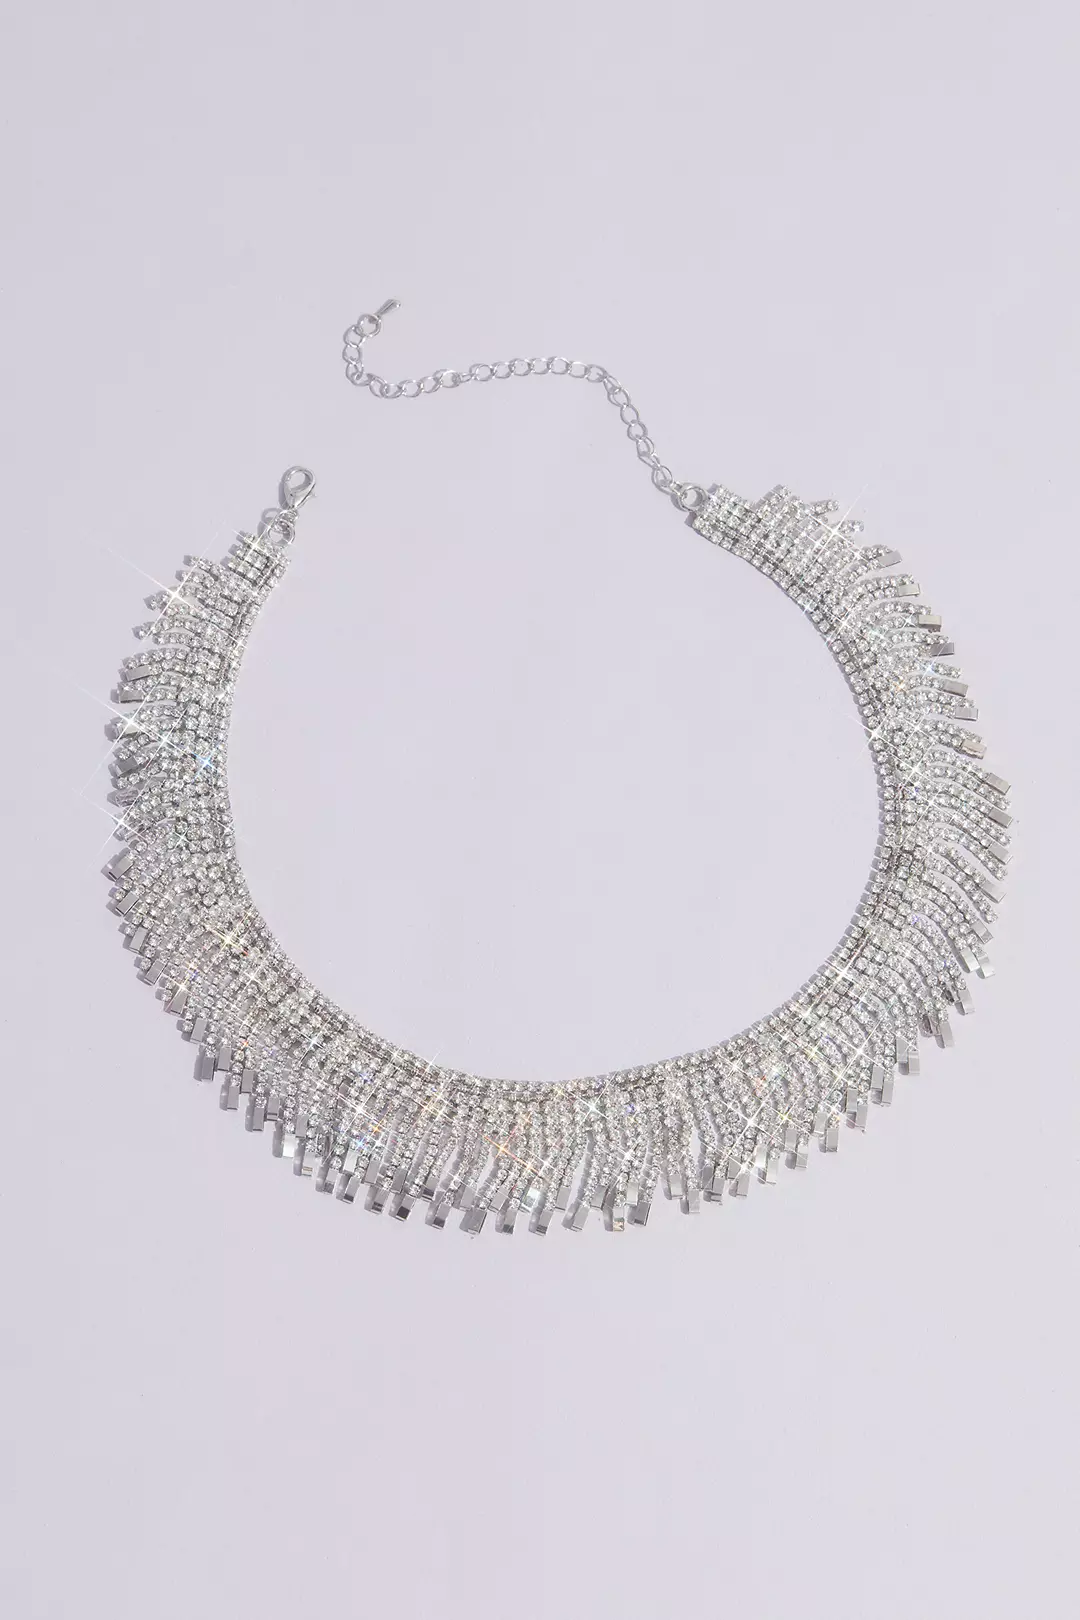 Fringed Crystal Collar Necklace Image